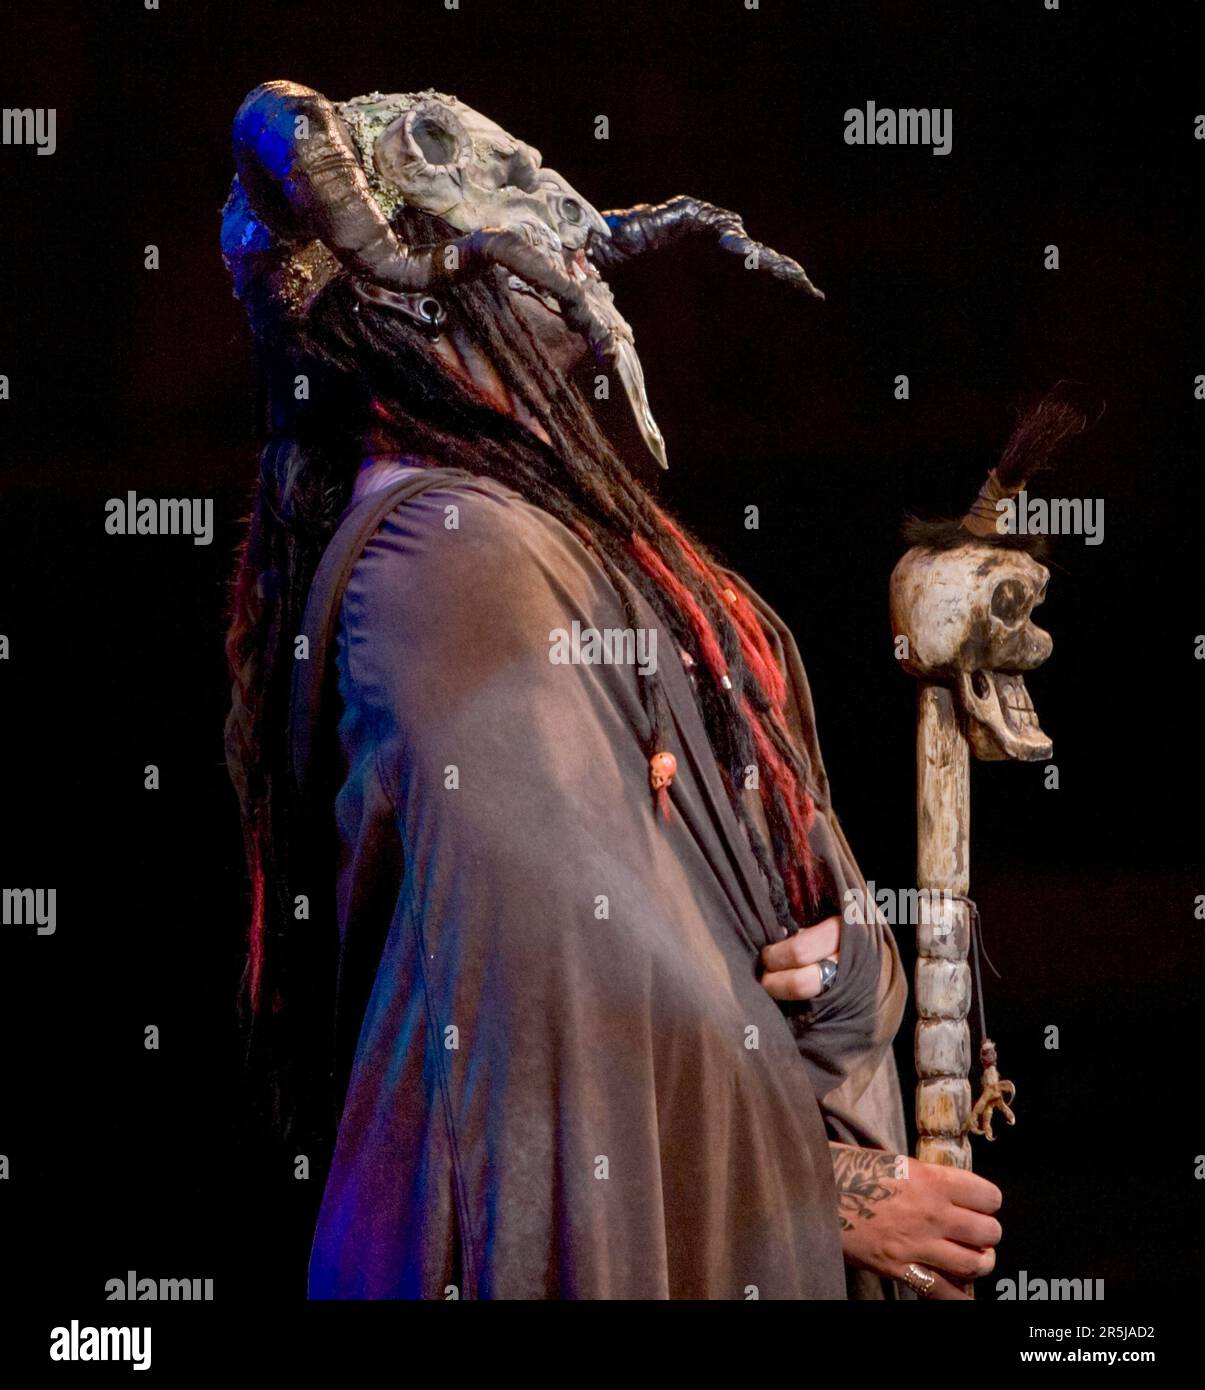 https://c8.alamy.com/comp/2R5JAD2/the-prosthetic-category-was-won-by-artist-yolanda-bartram-at-the-new-zealand-body-art-awards-at-the-north-shore-event-centre-auckland-new-zealand-2R5JAD2.jpg